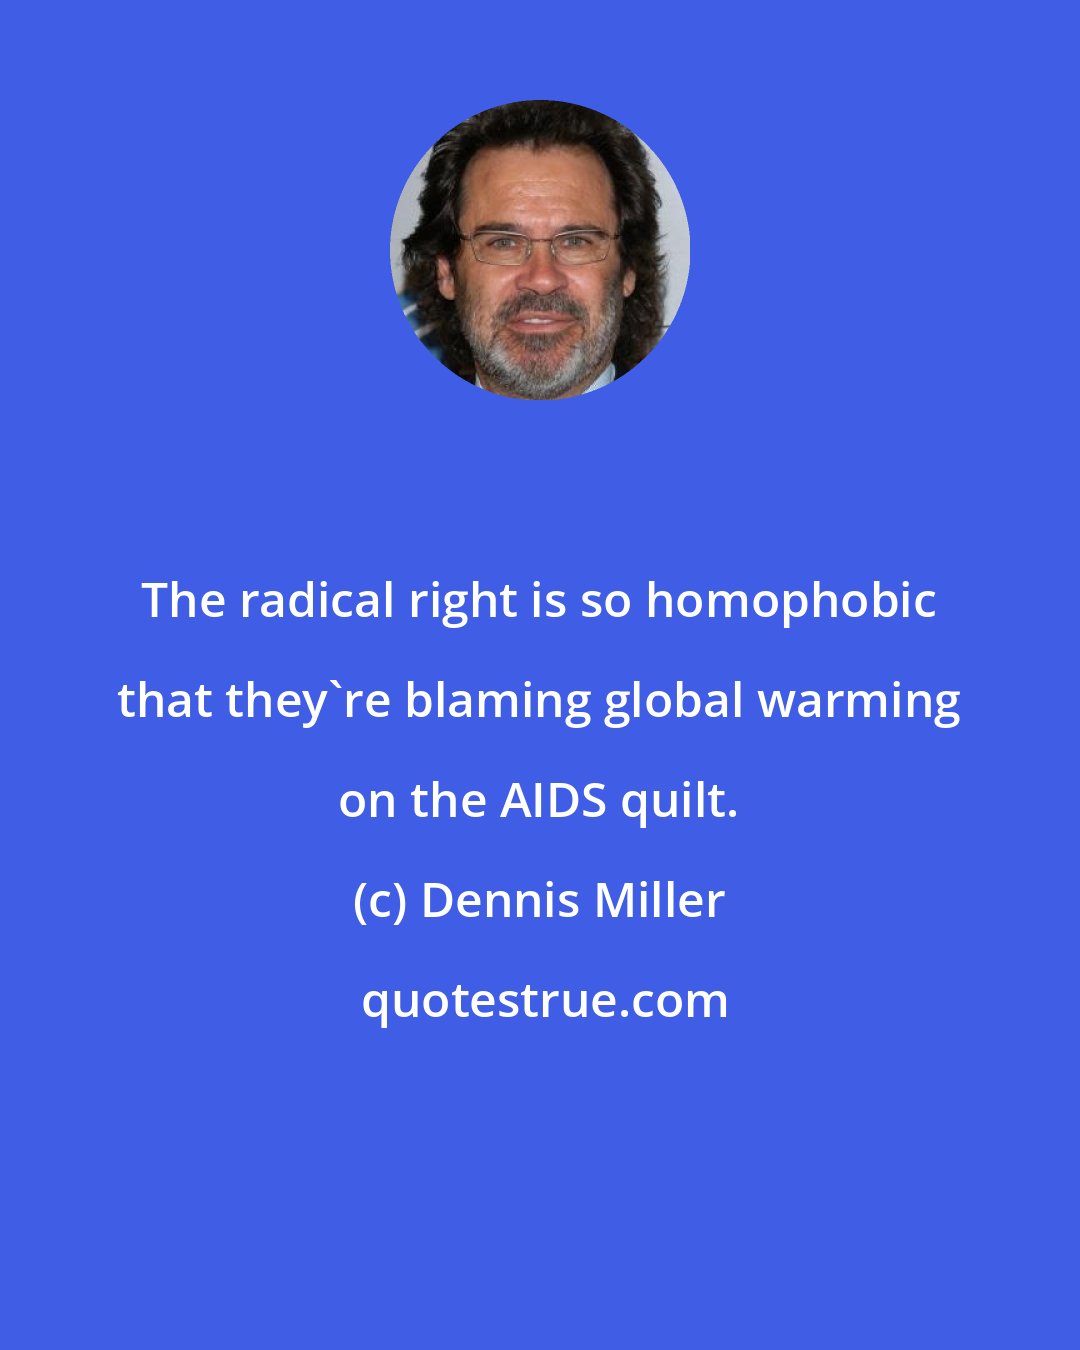 Dennis Miller: The radical right is so homophobic that they're blaming global warming on the AIDS quilt.